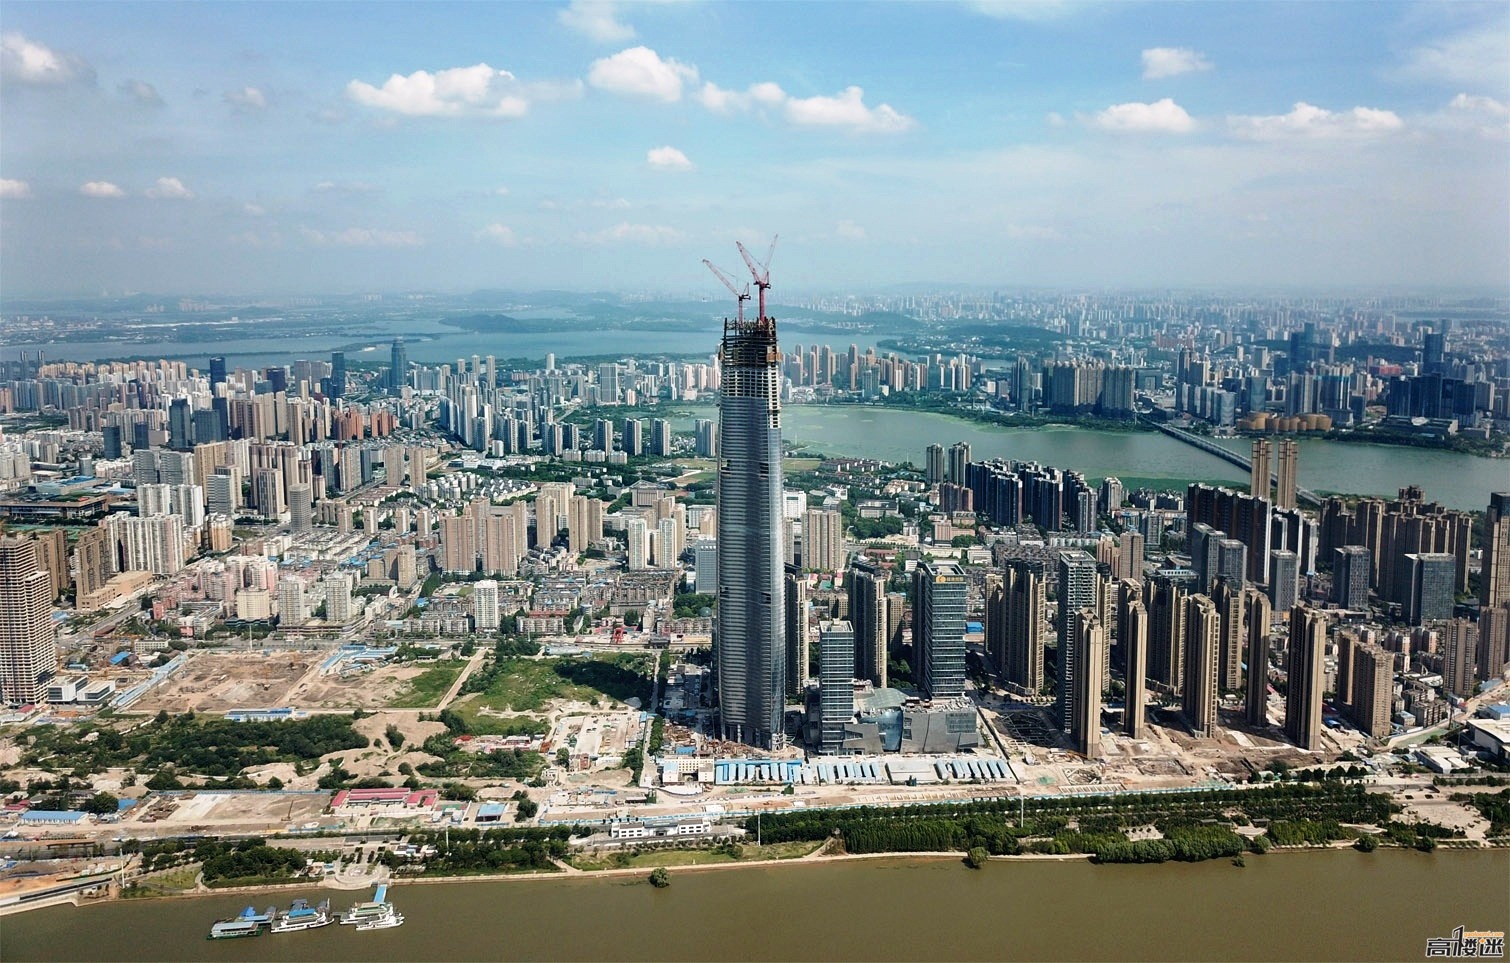 The economy of Wuhan:  A hub of commerce, education, industry and politics